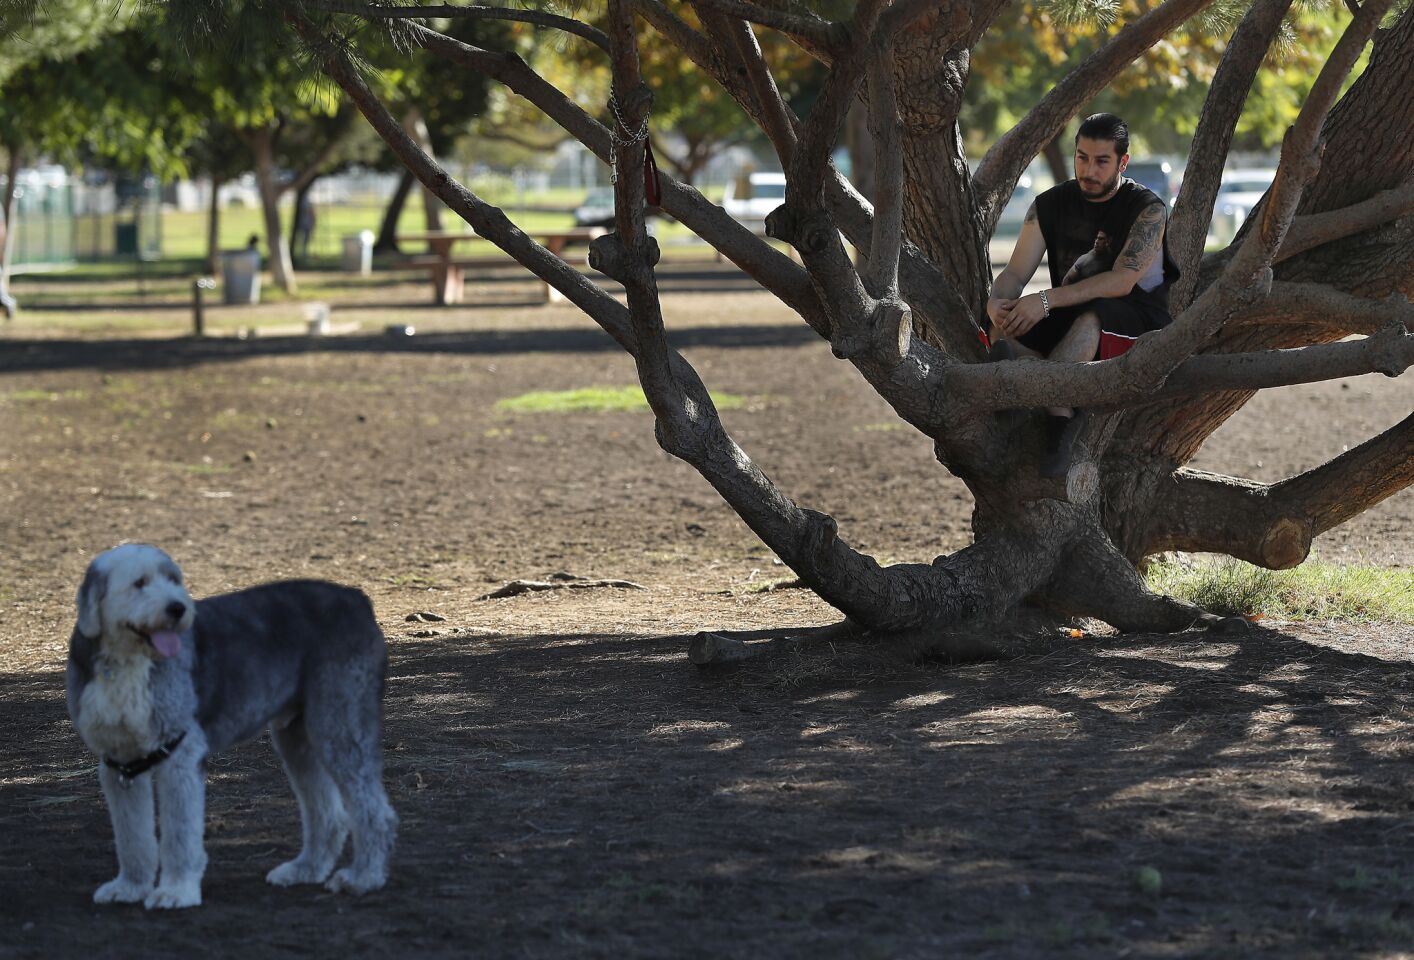 Joseph Neksalyan of Tarzana finds a shady spot to relax during a visit to Sepulveda Basin Off-Leash Dog Park in Encino.